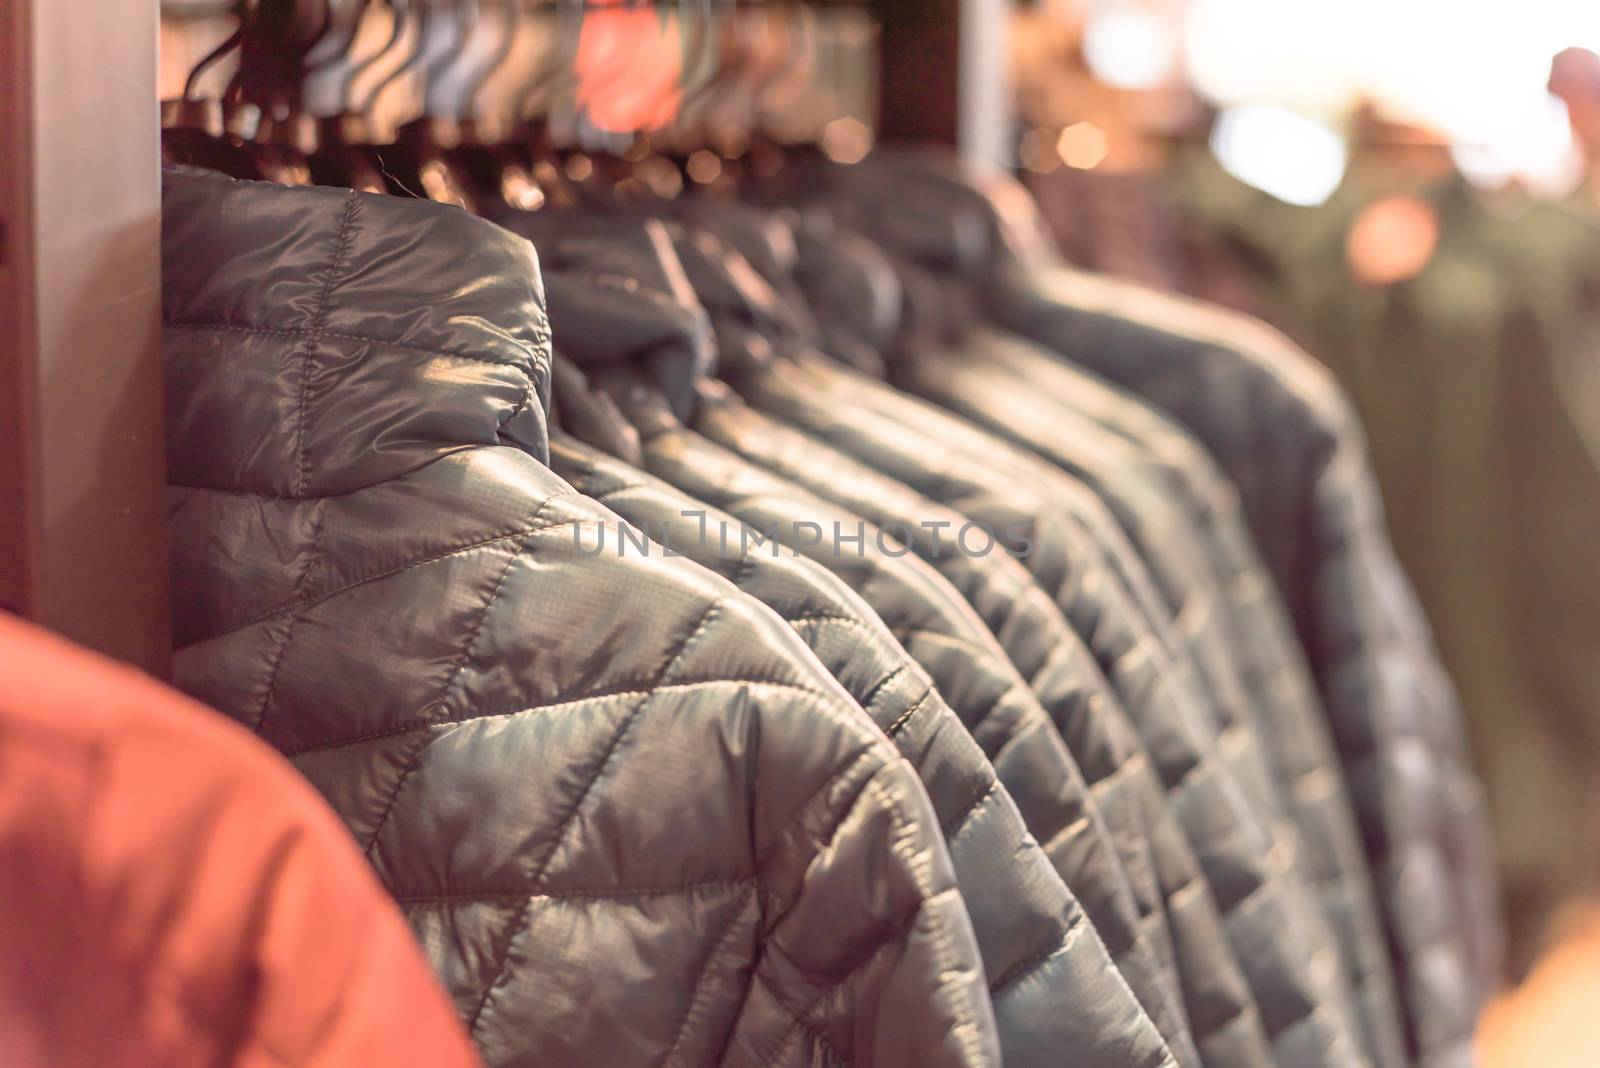 Row of women down jackets at American outdoor clothing store by trongnguyen